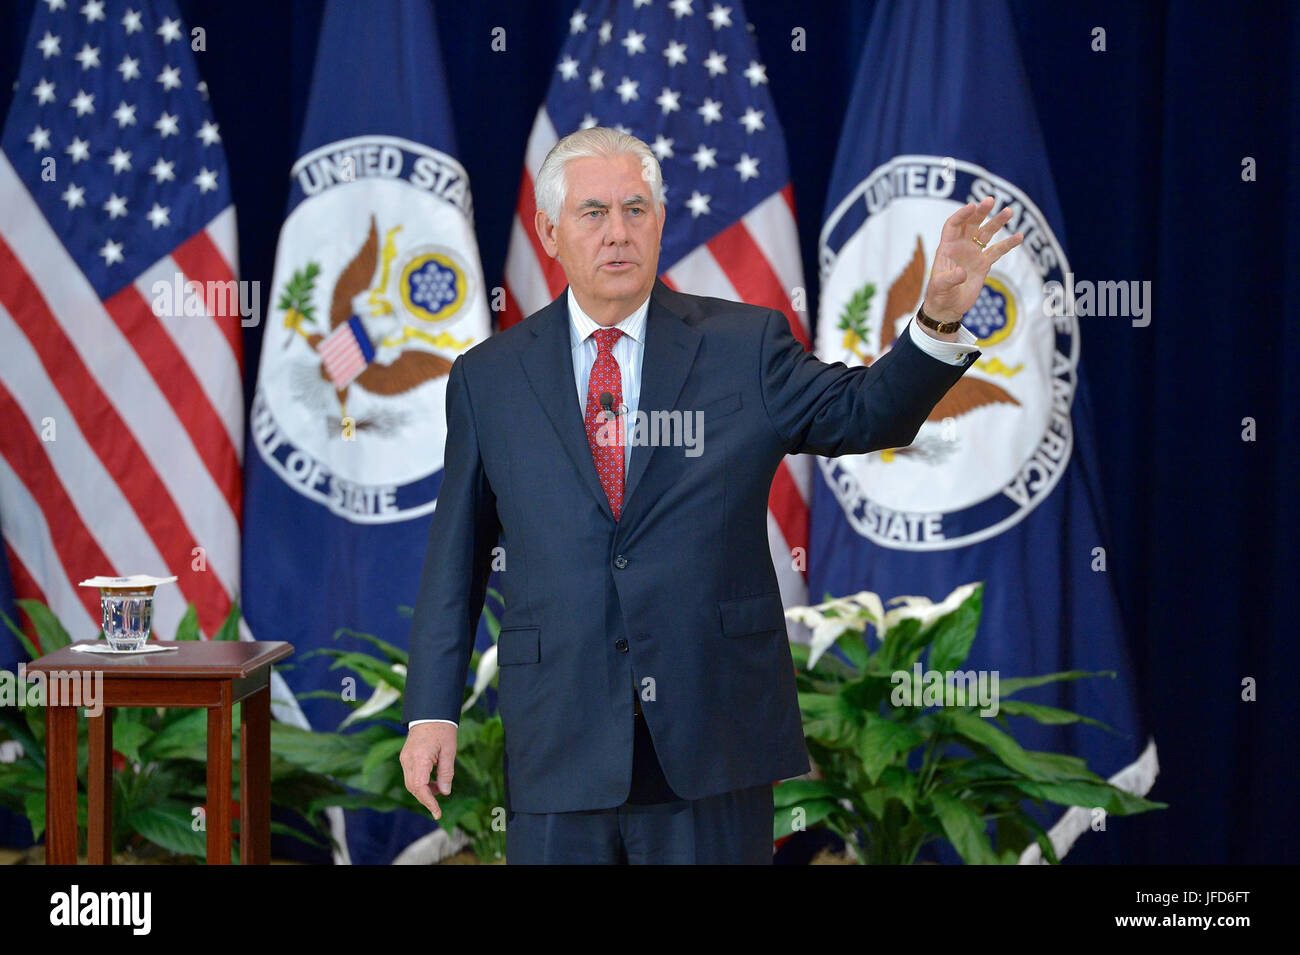 U.S. Secretary of State Rex Tillerson addresses State Department employees at the Department in Washington, D.C., on May 3, 2017. Stock Photo